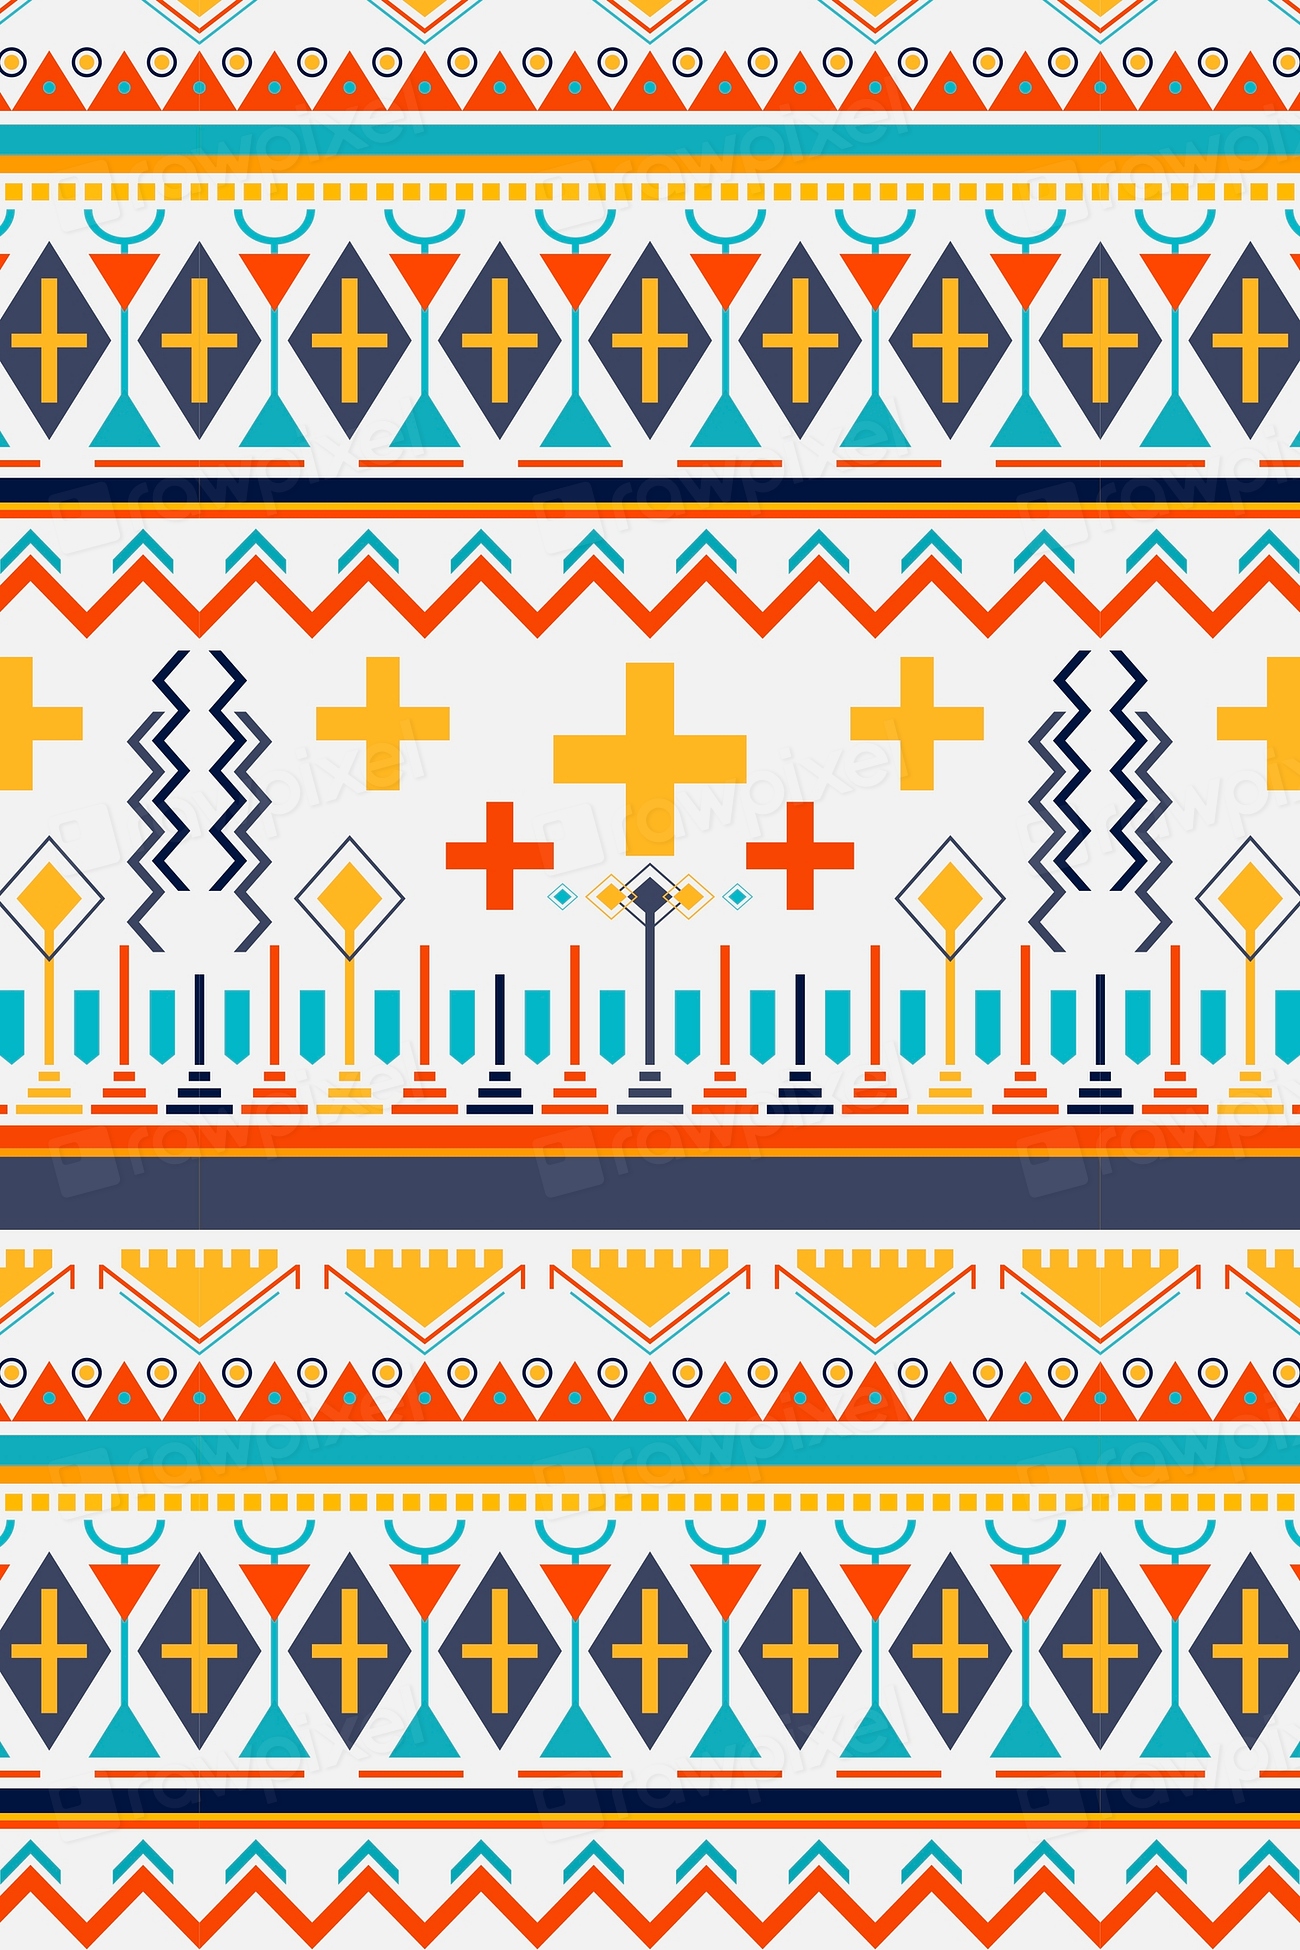 Tribal pattern background vector, colorful | Free Vector - rawpixel